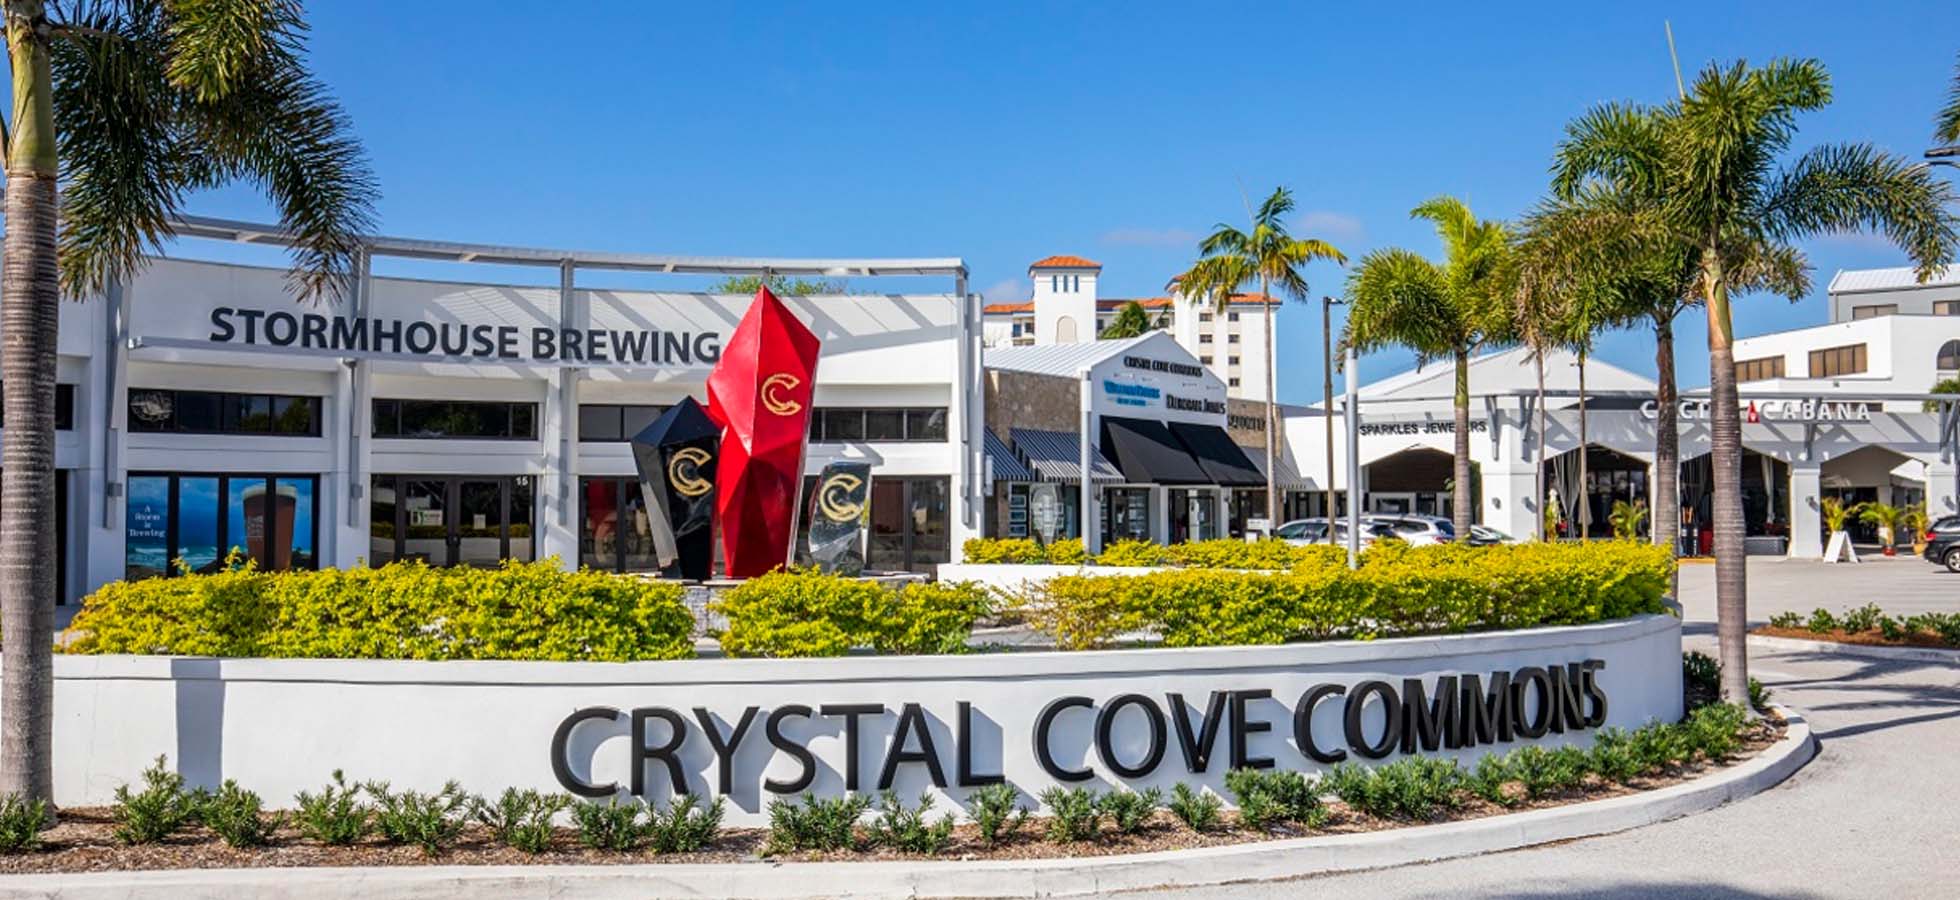 Crystal Cove Commons